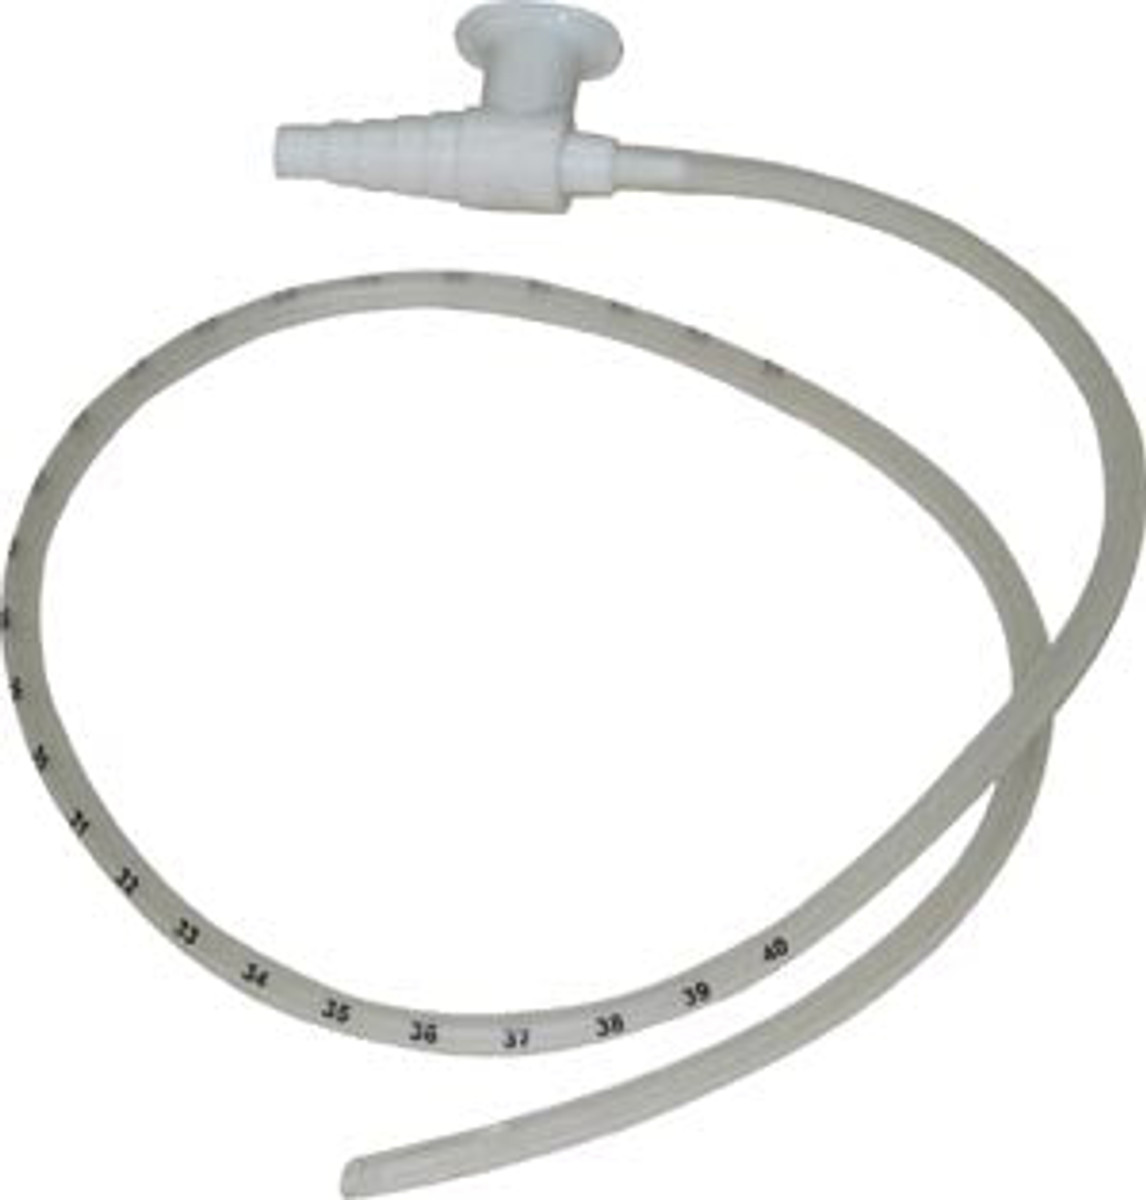 AMSure Suction Catheters